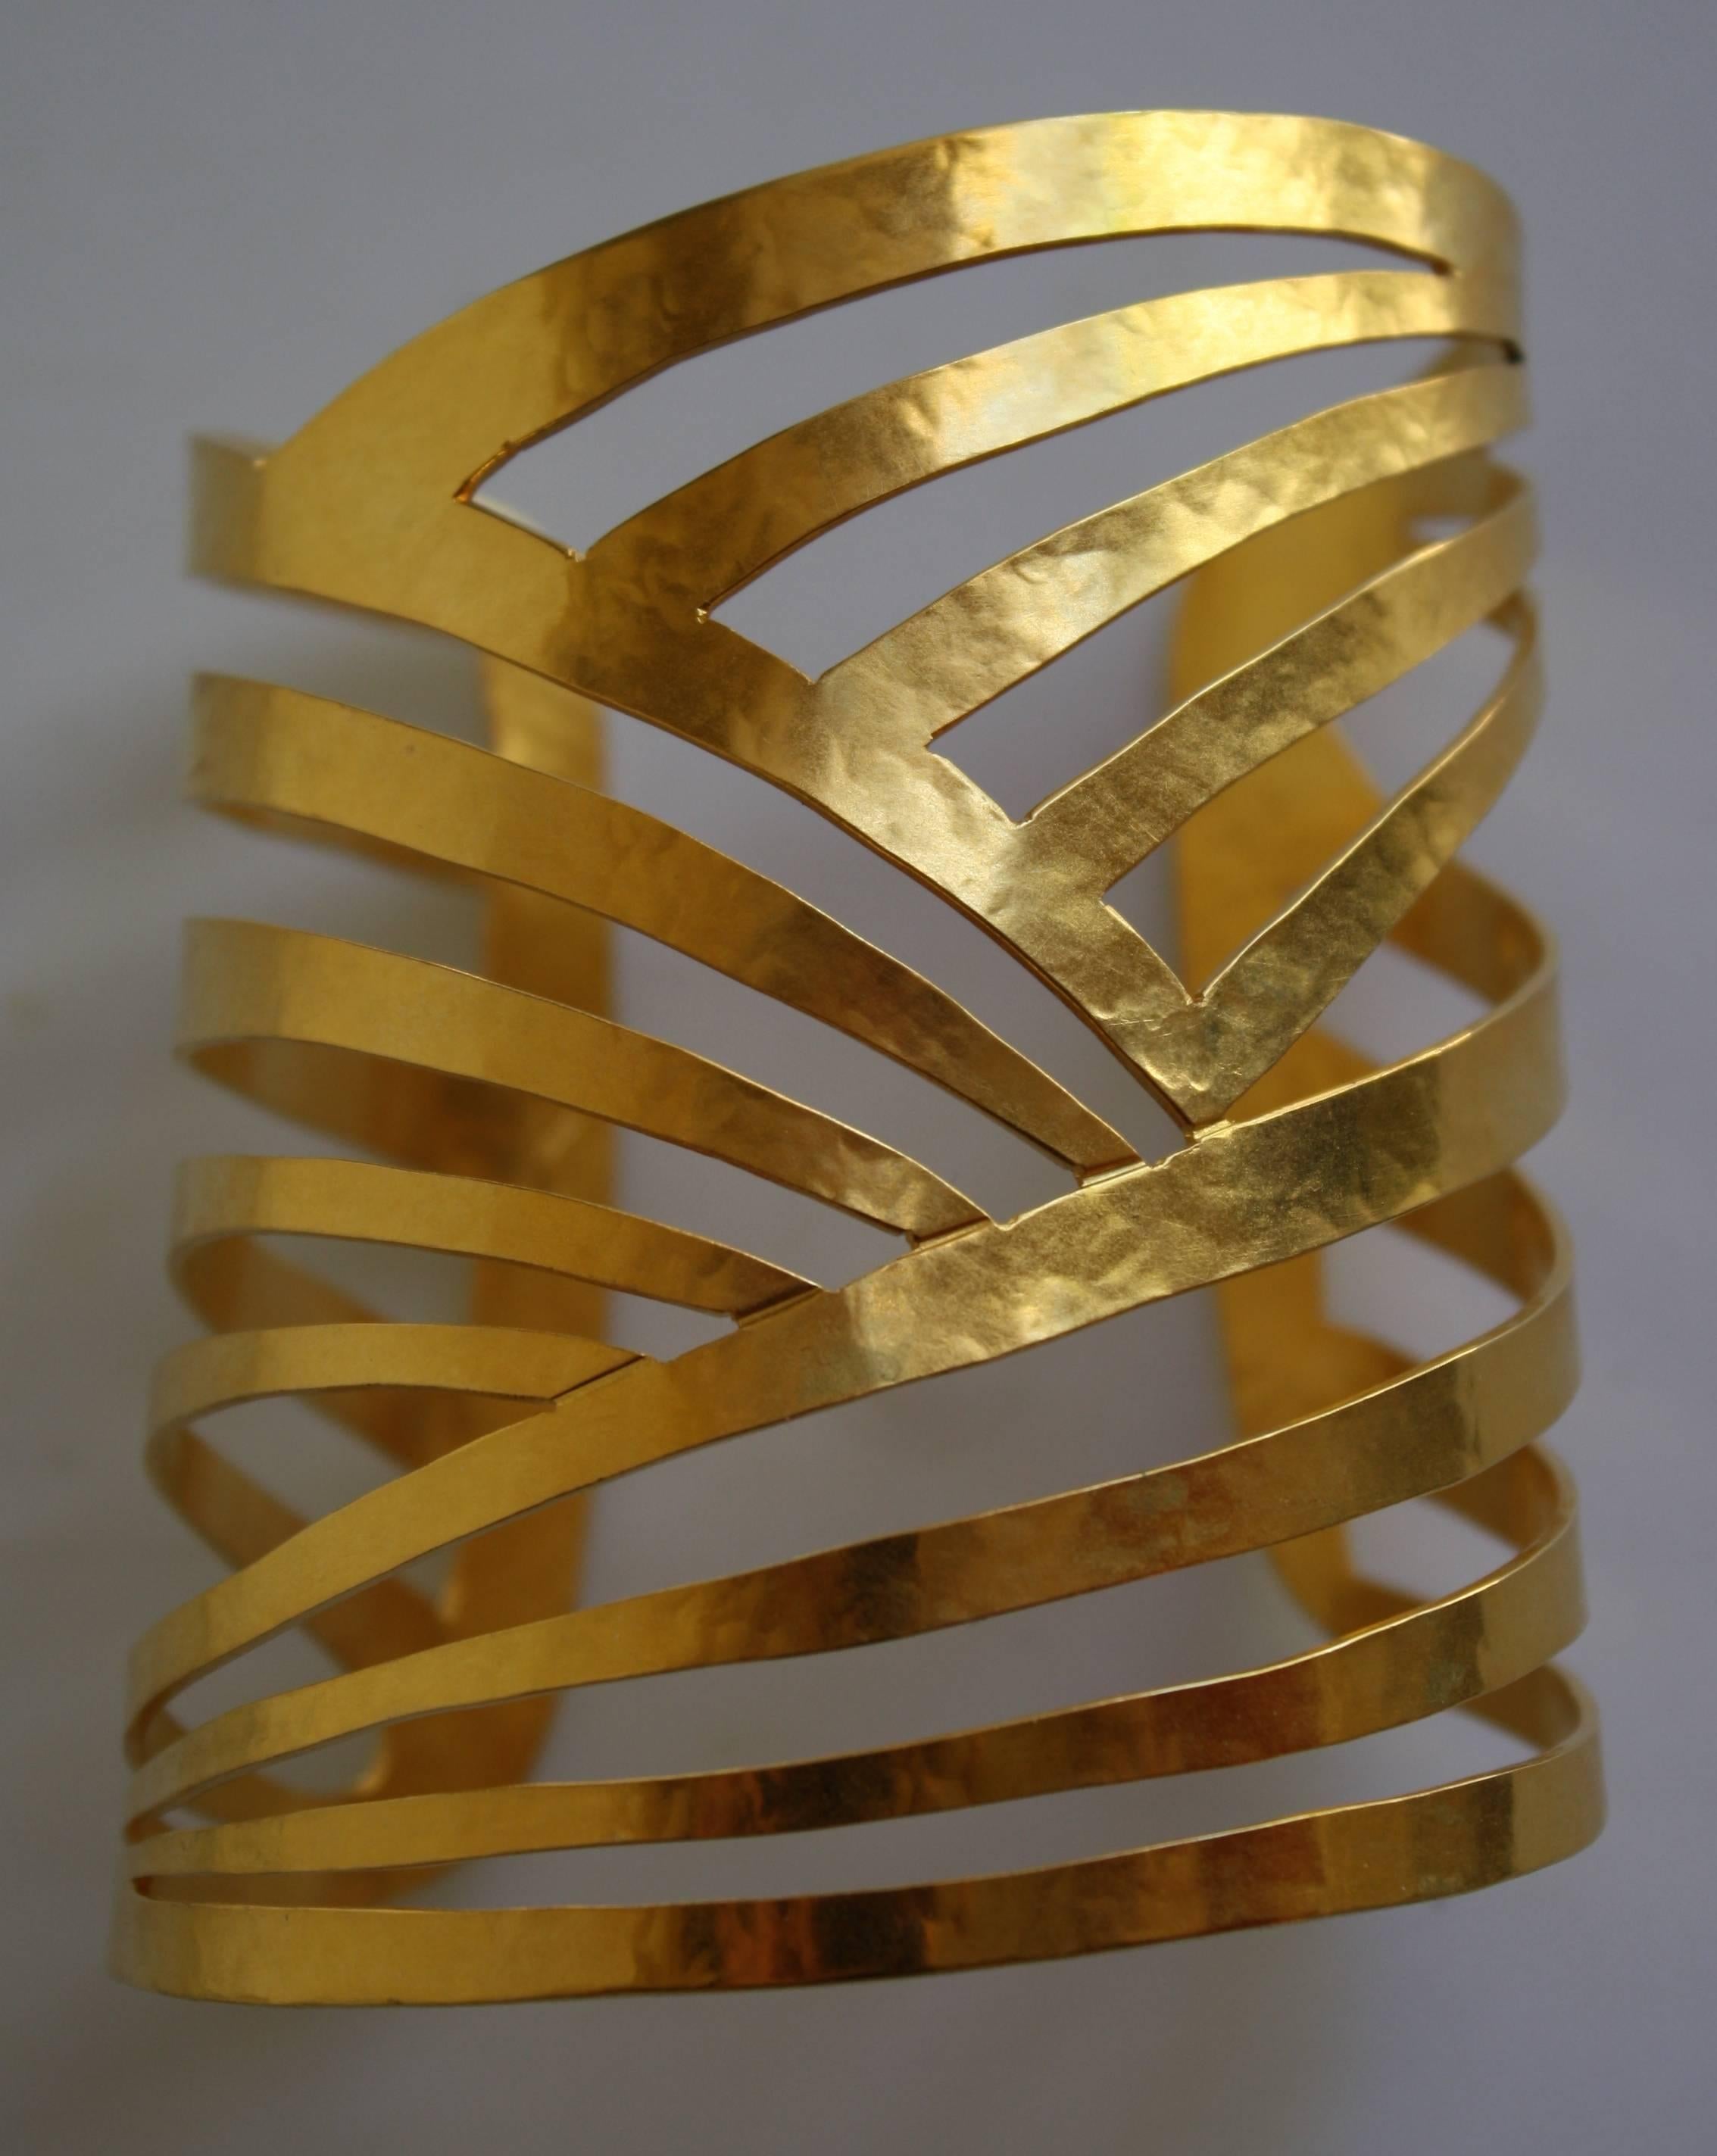 Hand hammered asymmetrical cutout cuff from Herve van der Straeten. Gold plated brass is very soft, making it very easy to adjust the size to your wrist. 

Designer Biography:

Hervé Van der Straeten was born in 1965 and is an independent